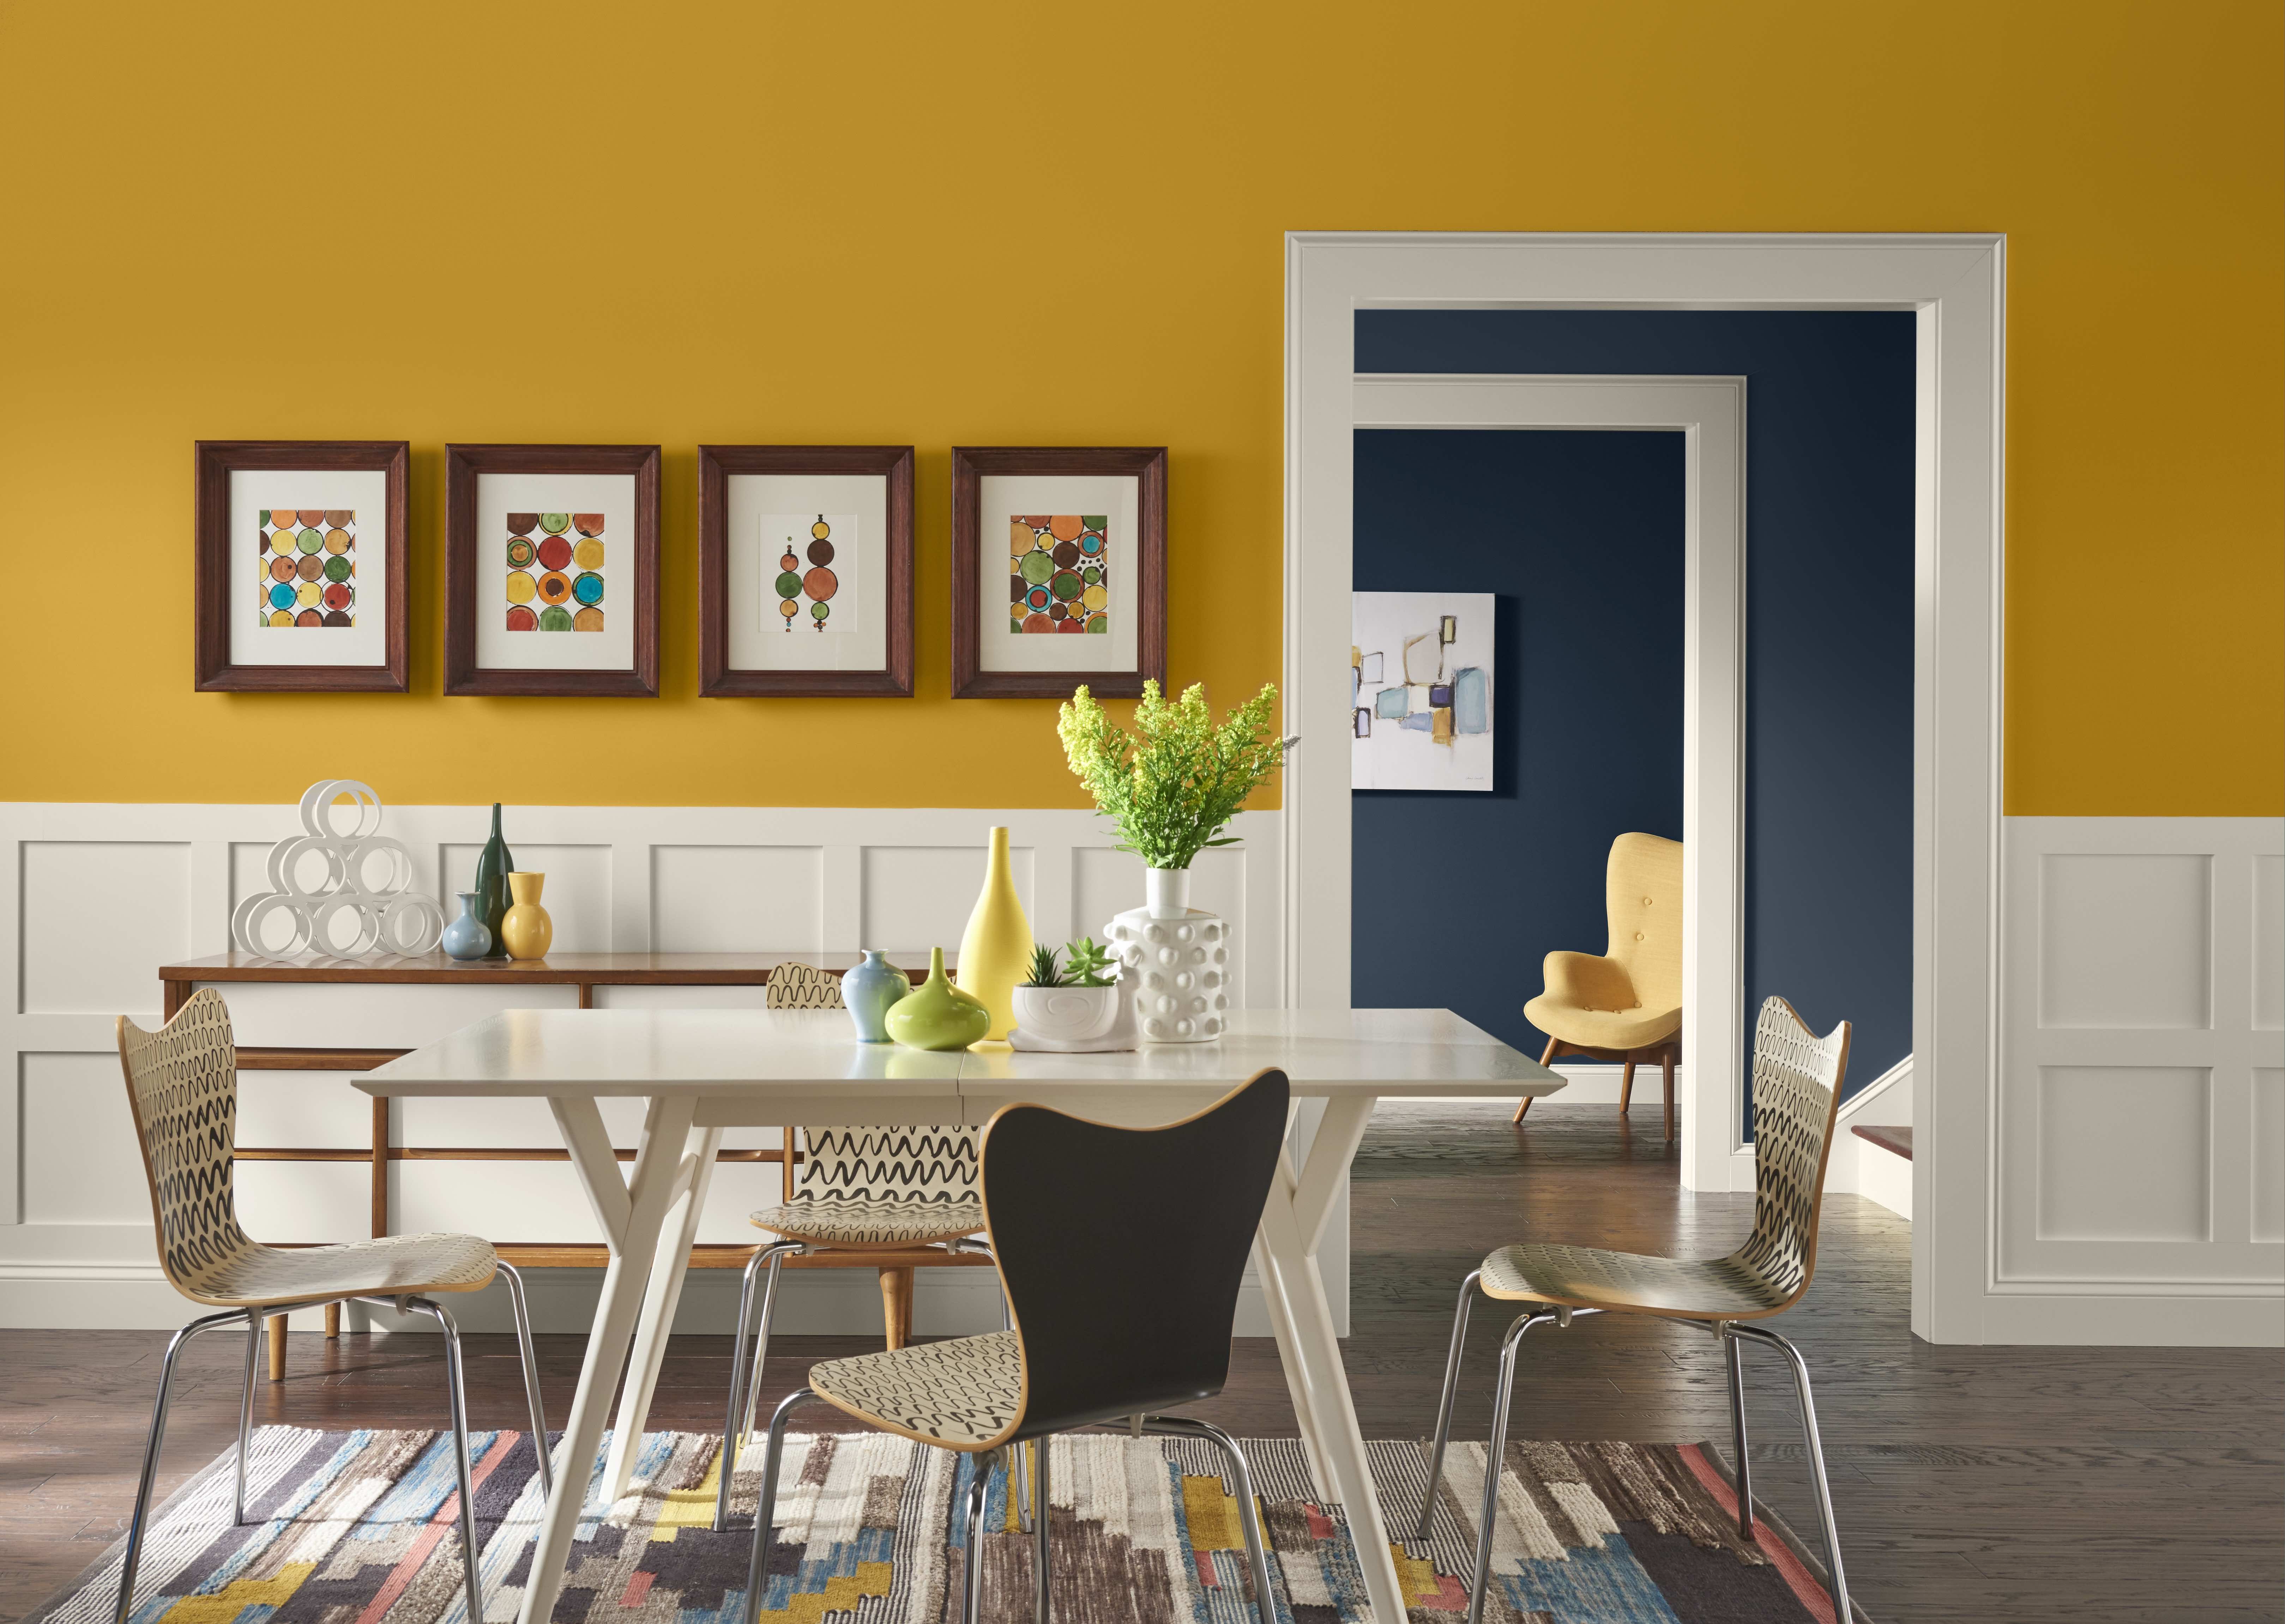 Sherwin Williams S 2020 Color Of The Year Reveal Naval Paint